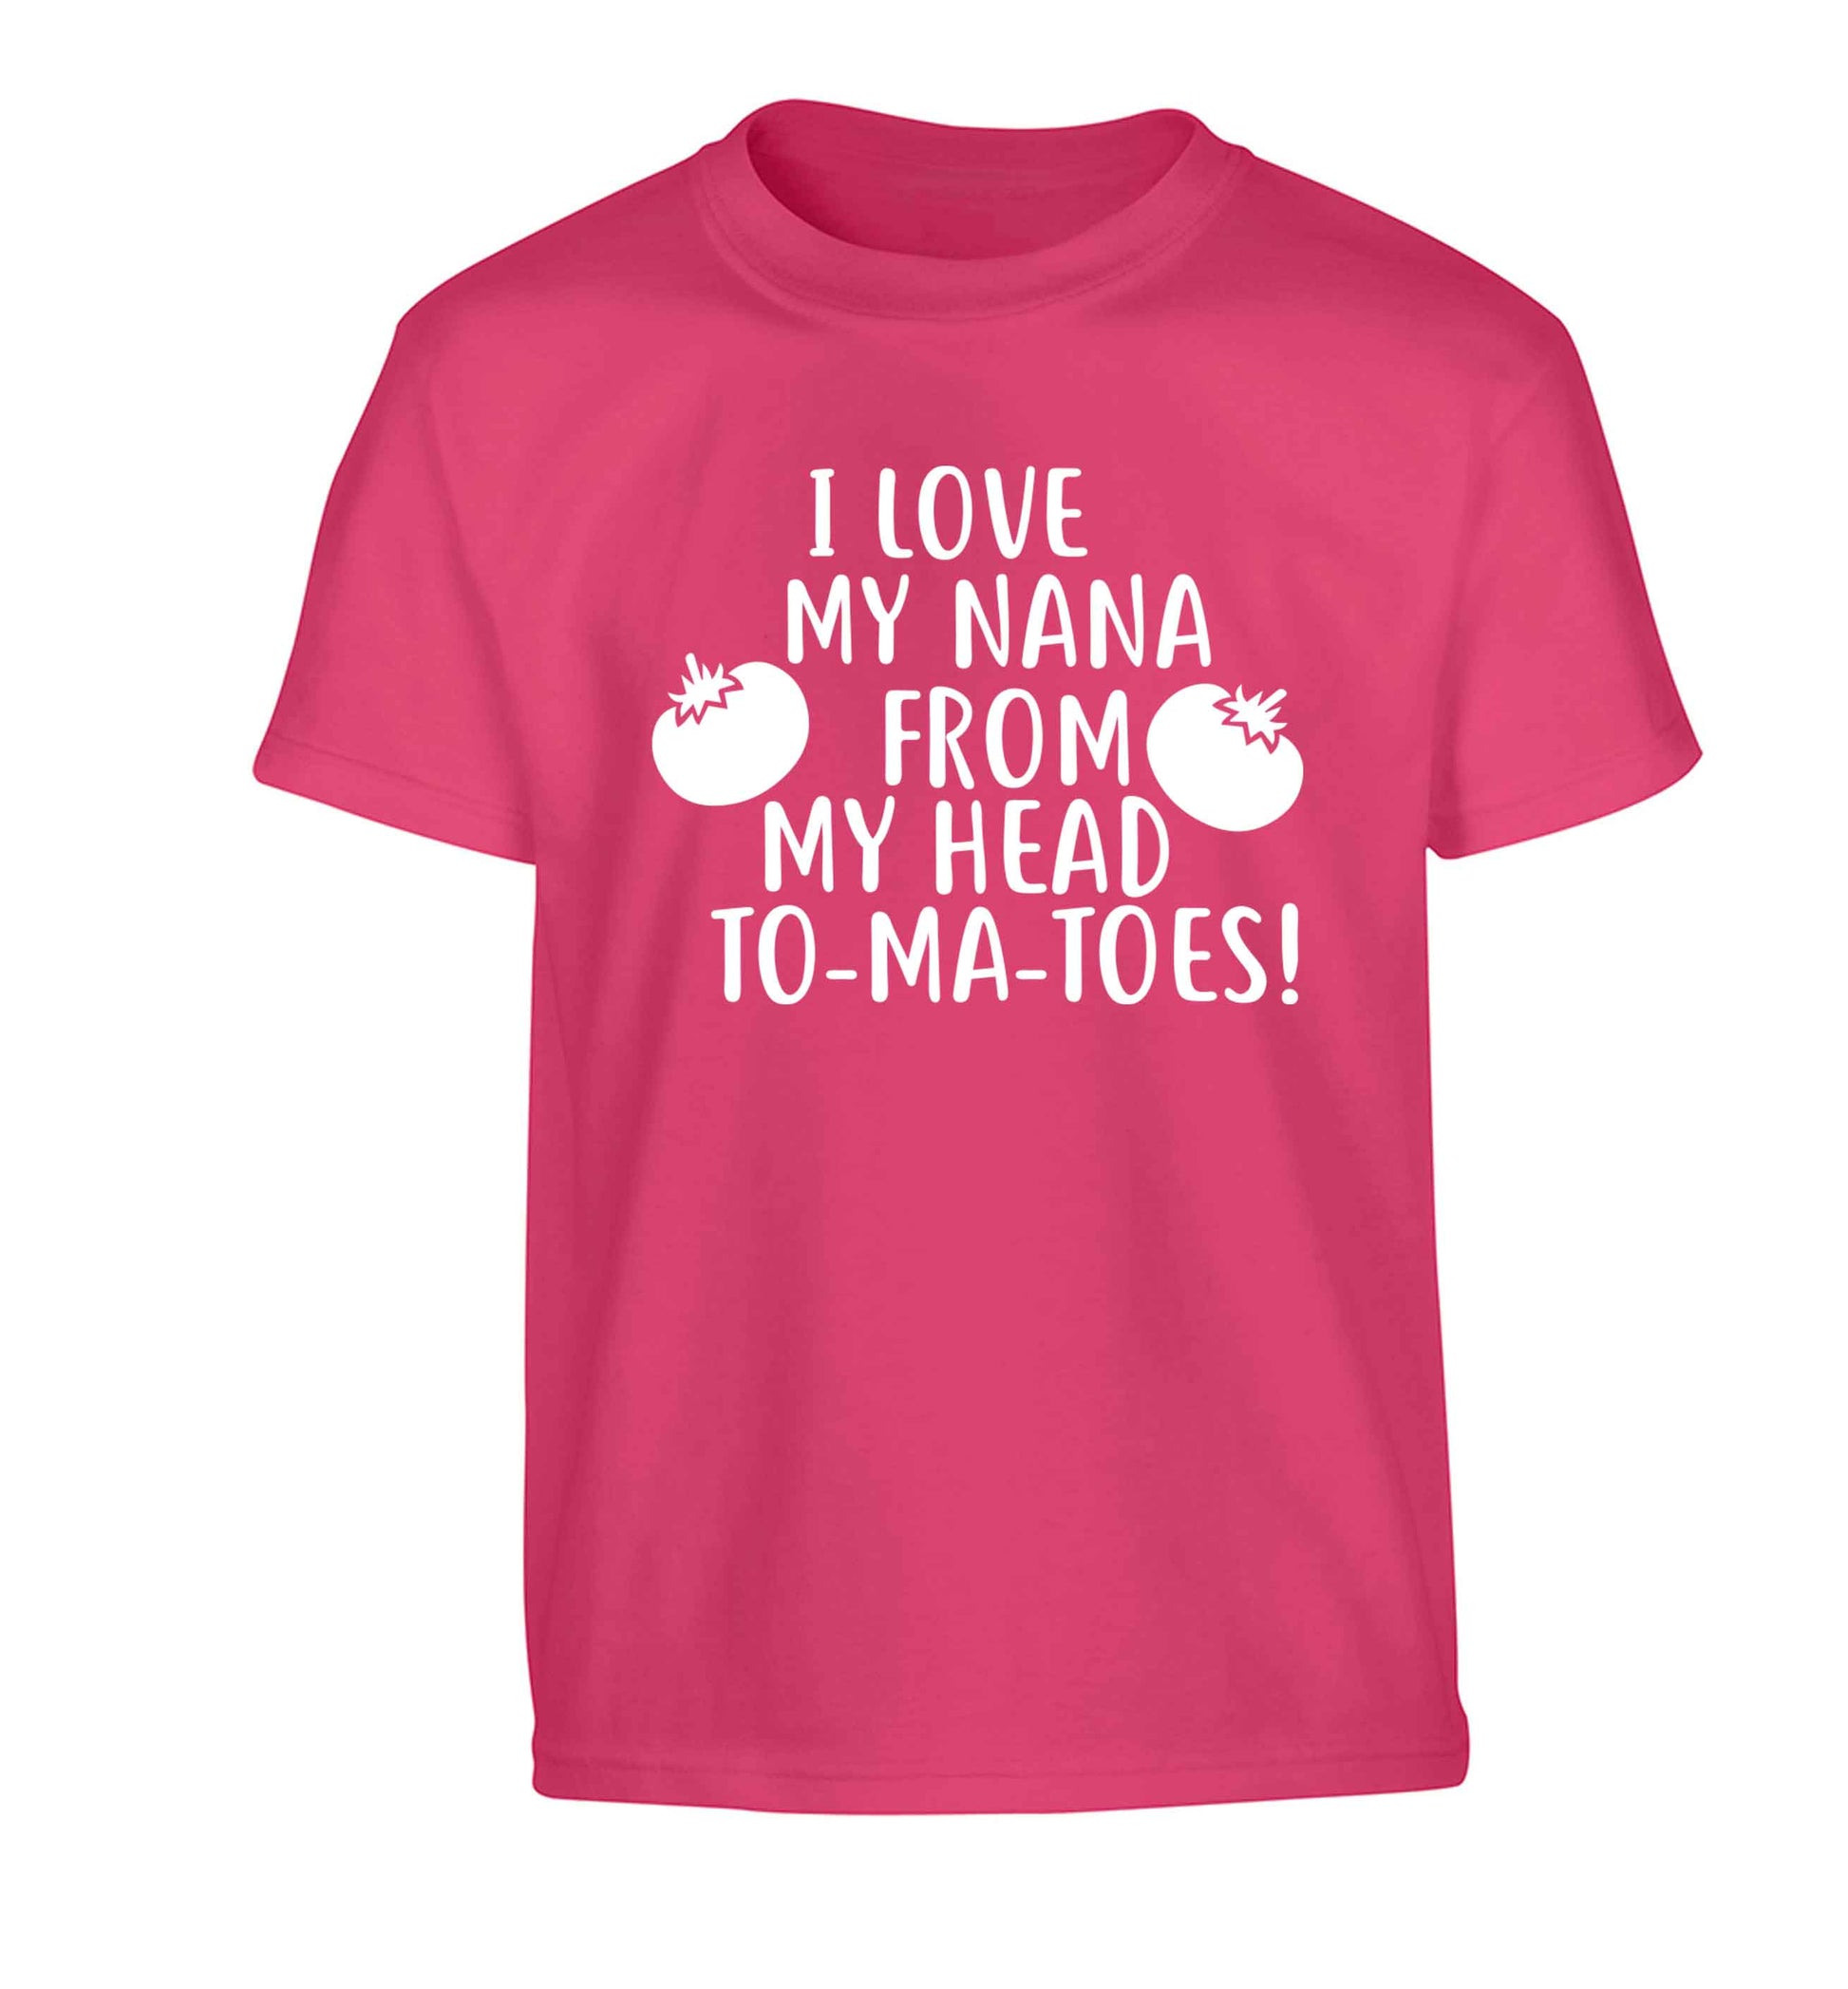 I love my nana from my head to-ma-toes Children's pink Tshirt 12-13 Years